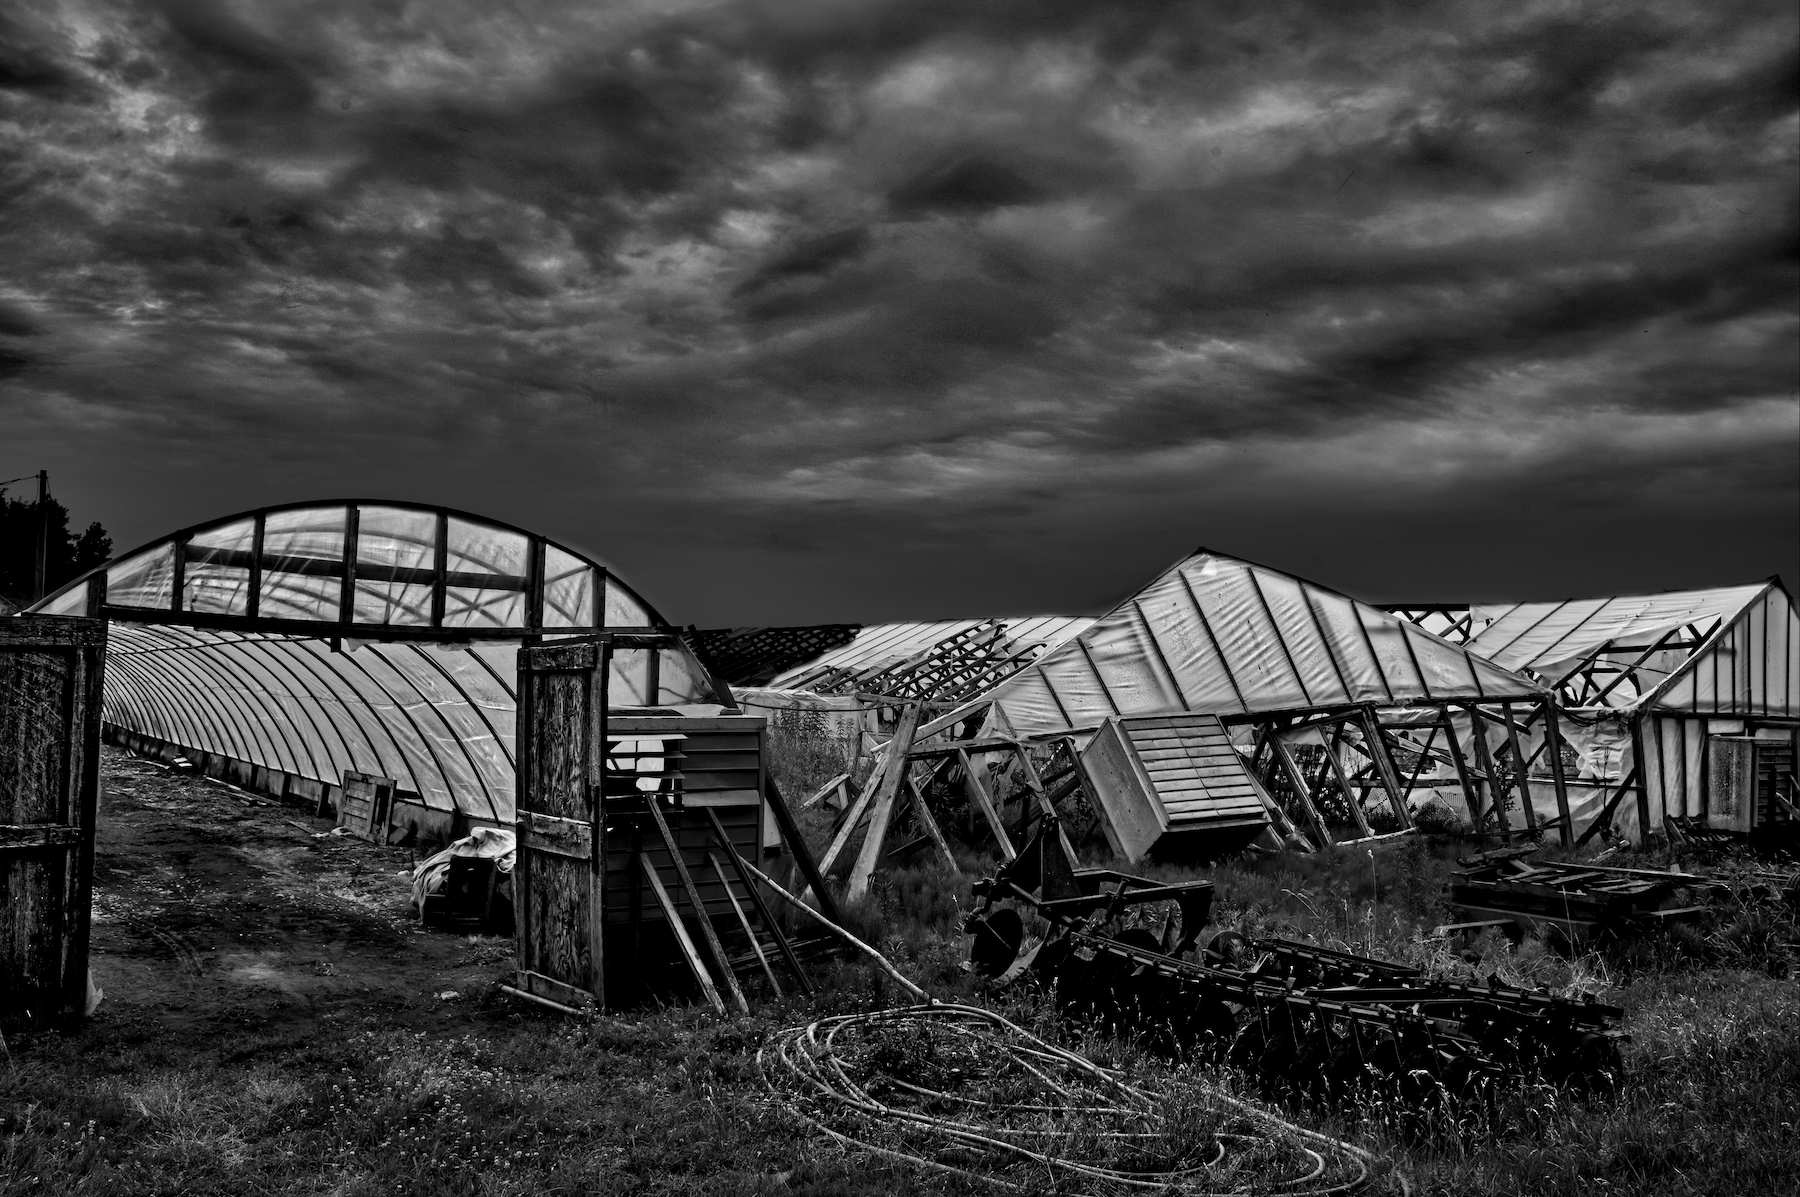 collapsed greenhouses with a angry sky in the background